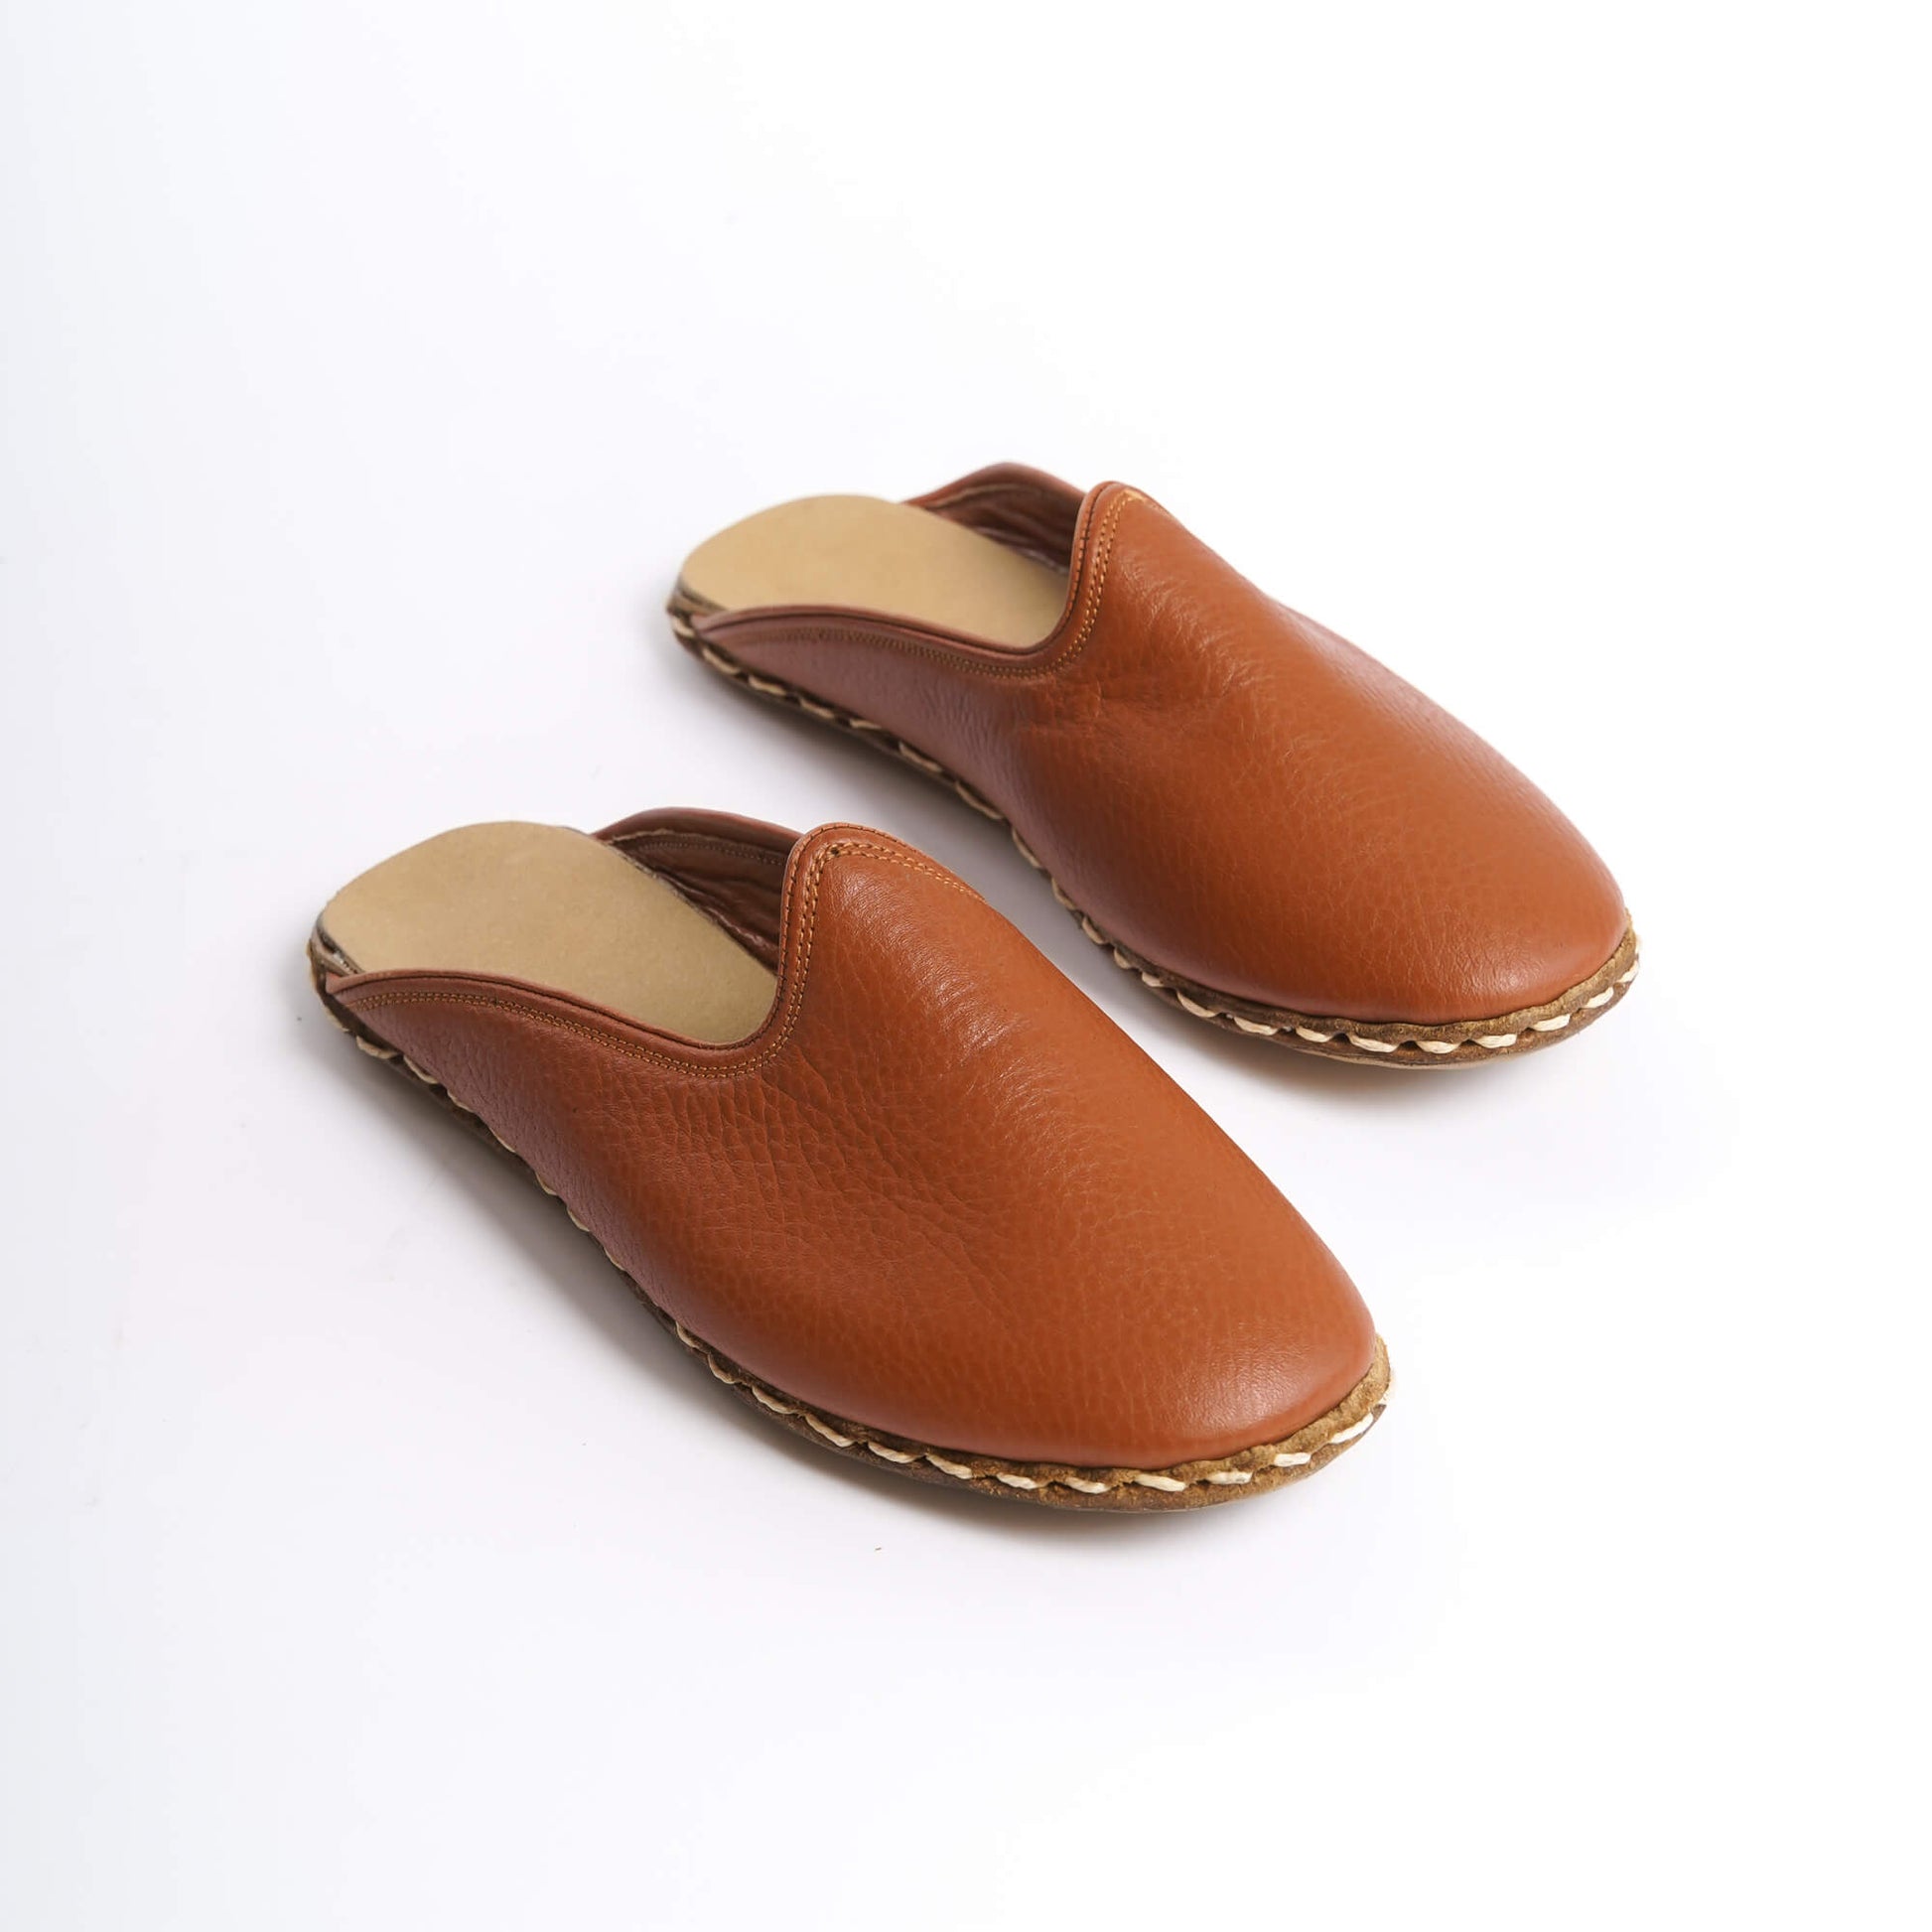 Handcrafted genuine leather summer slippers in tan with precise stitching.